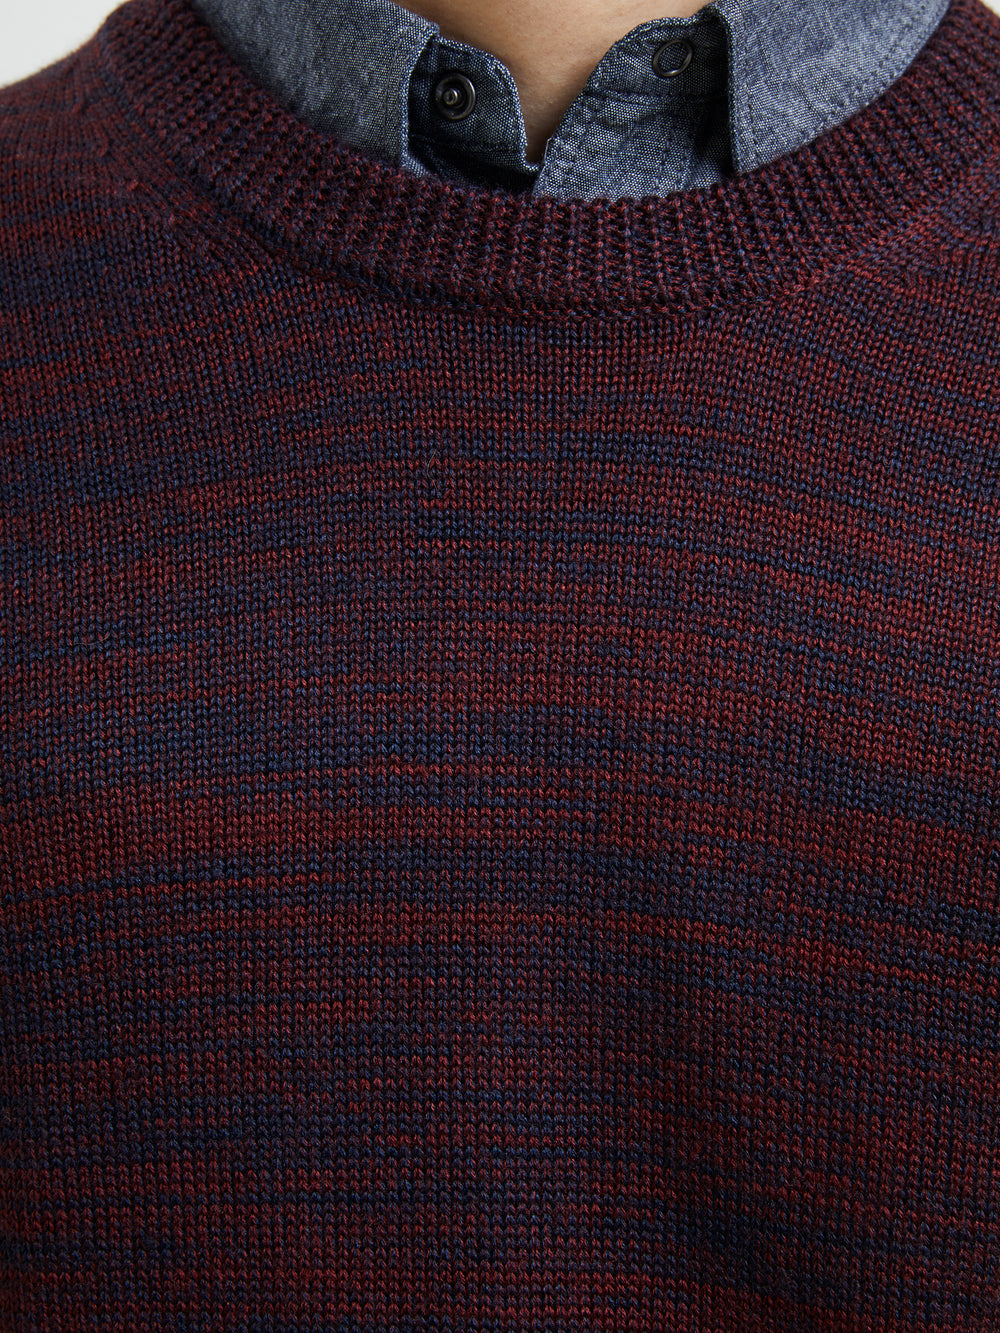 Space Dye Jumper Truffle Multi | French Connection UK